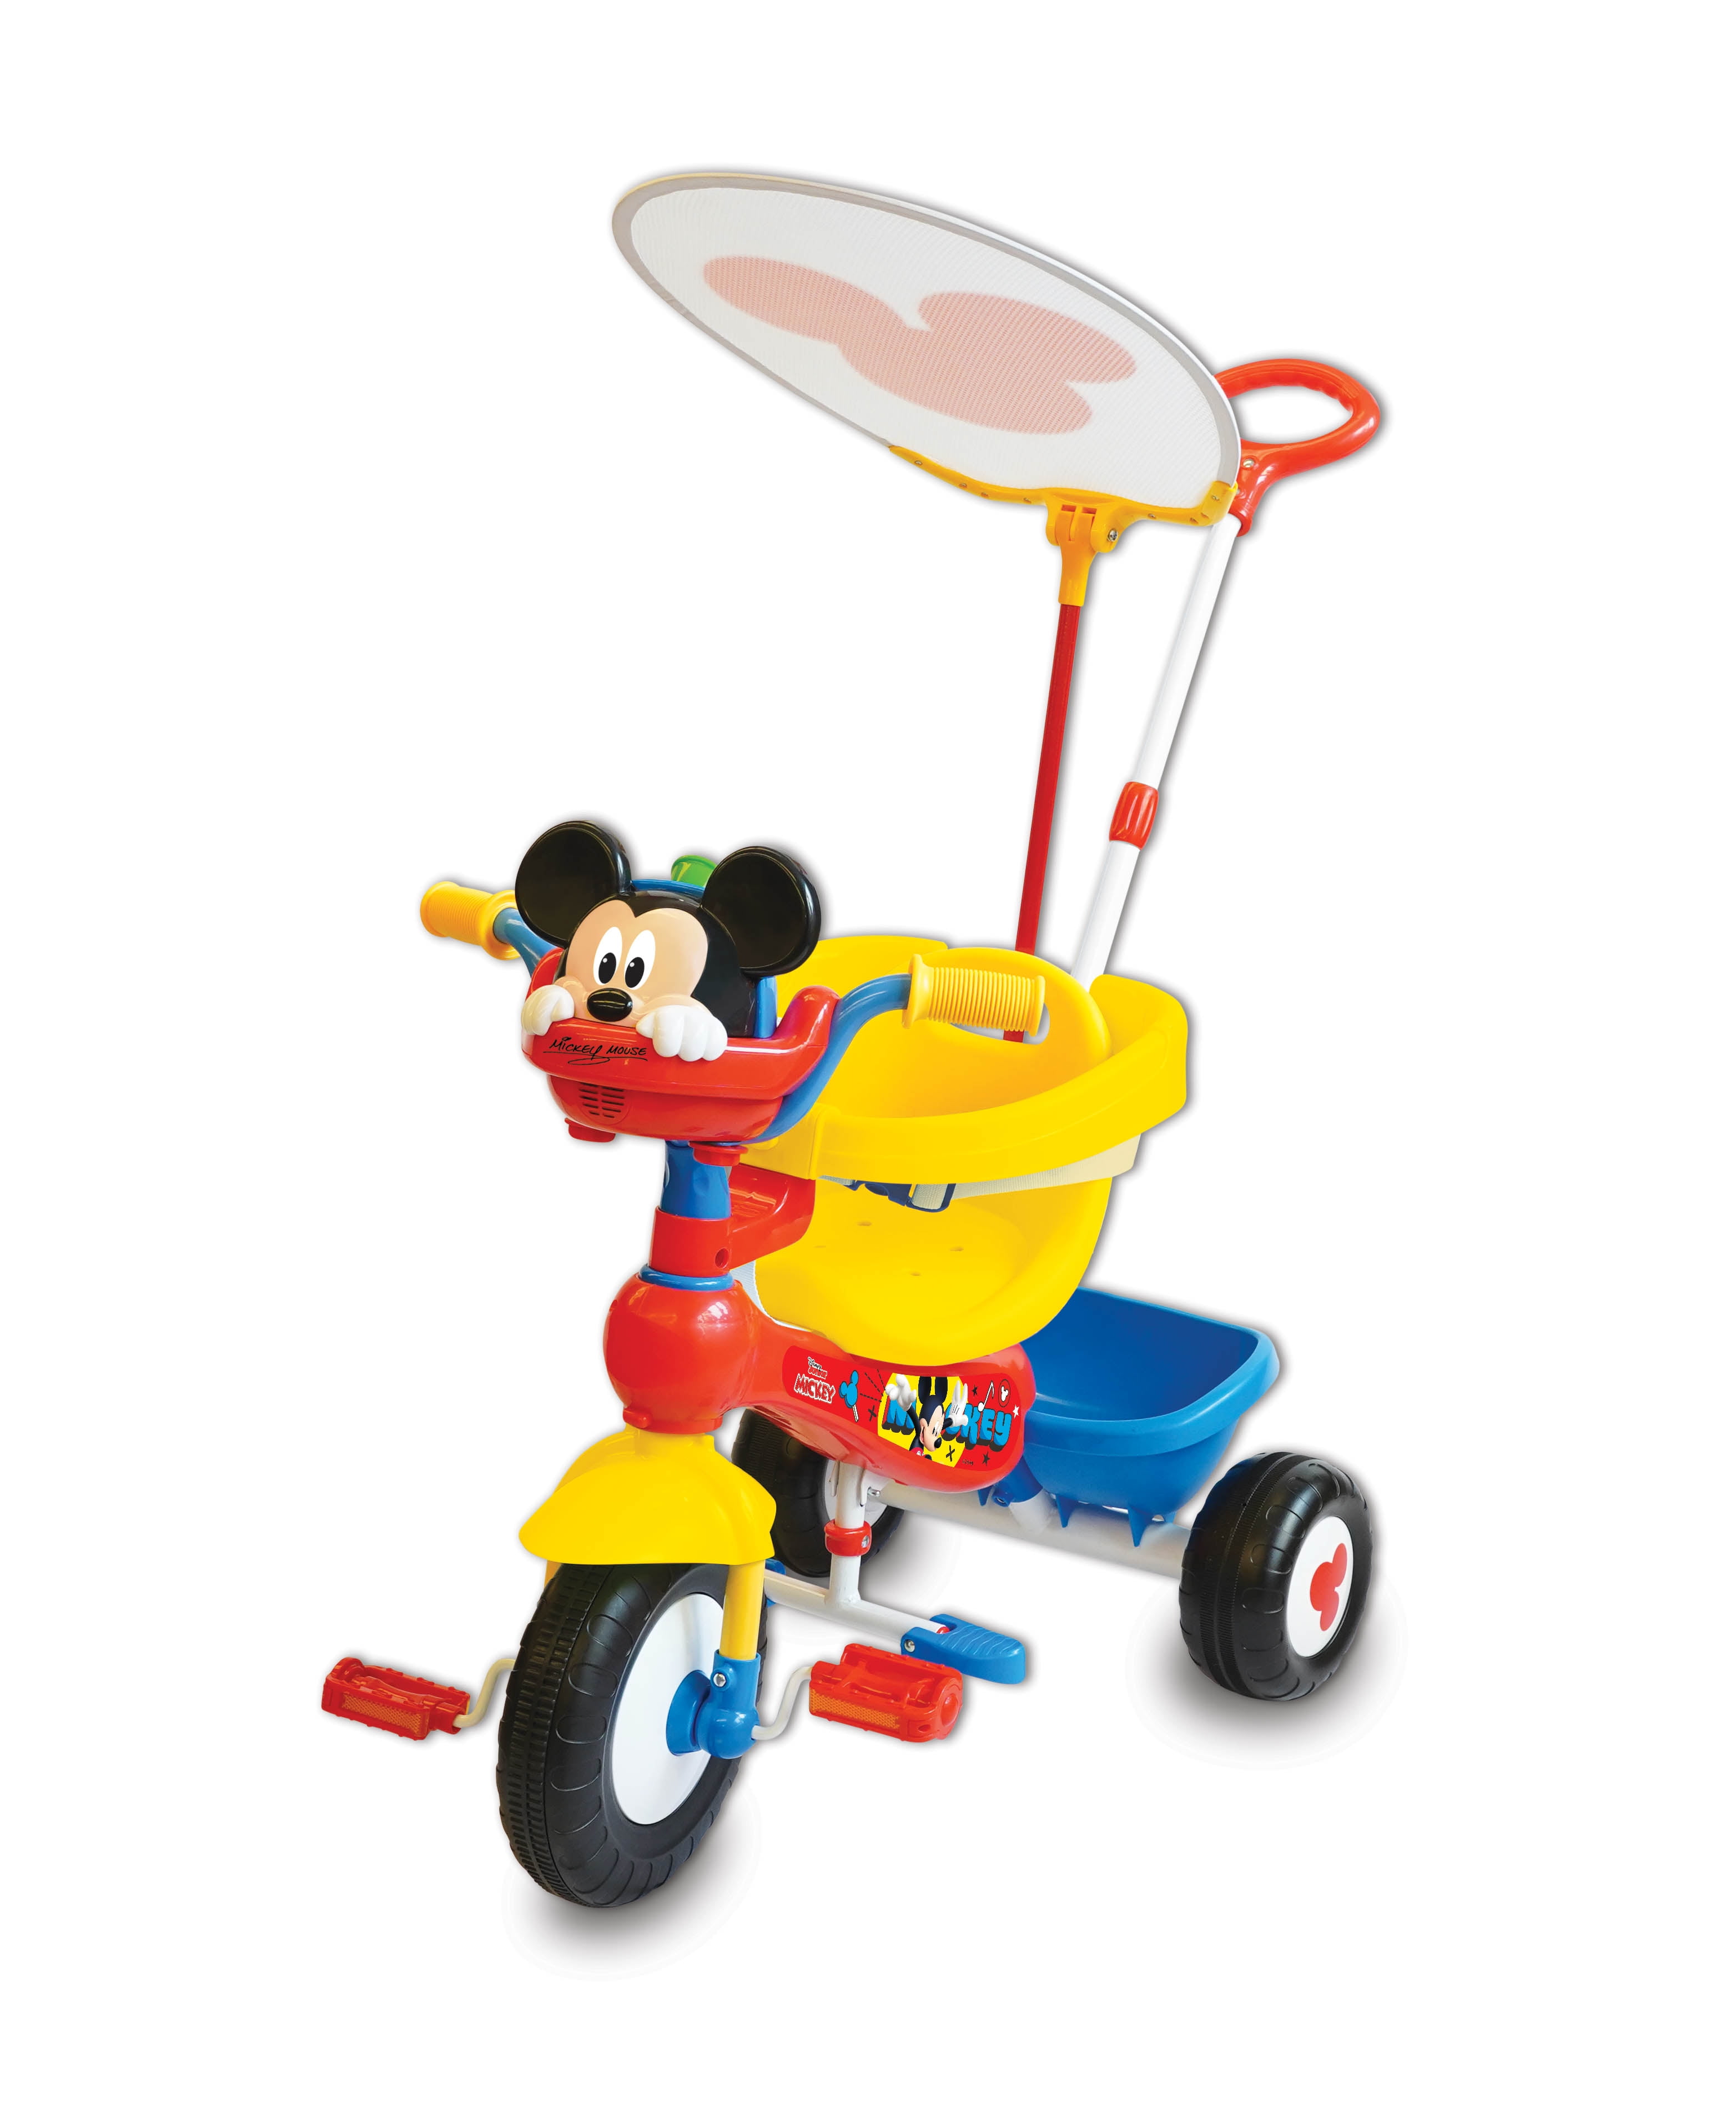 AmishToyBox.com Groffdale Chopper Deluxe Kid's Trike Red 